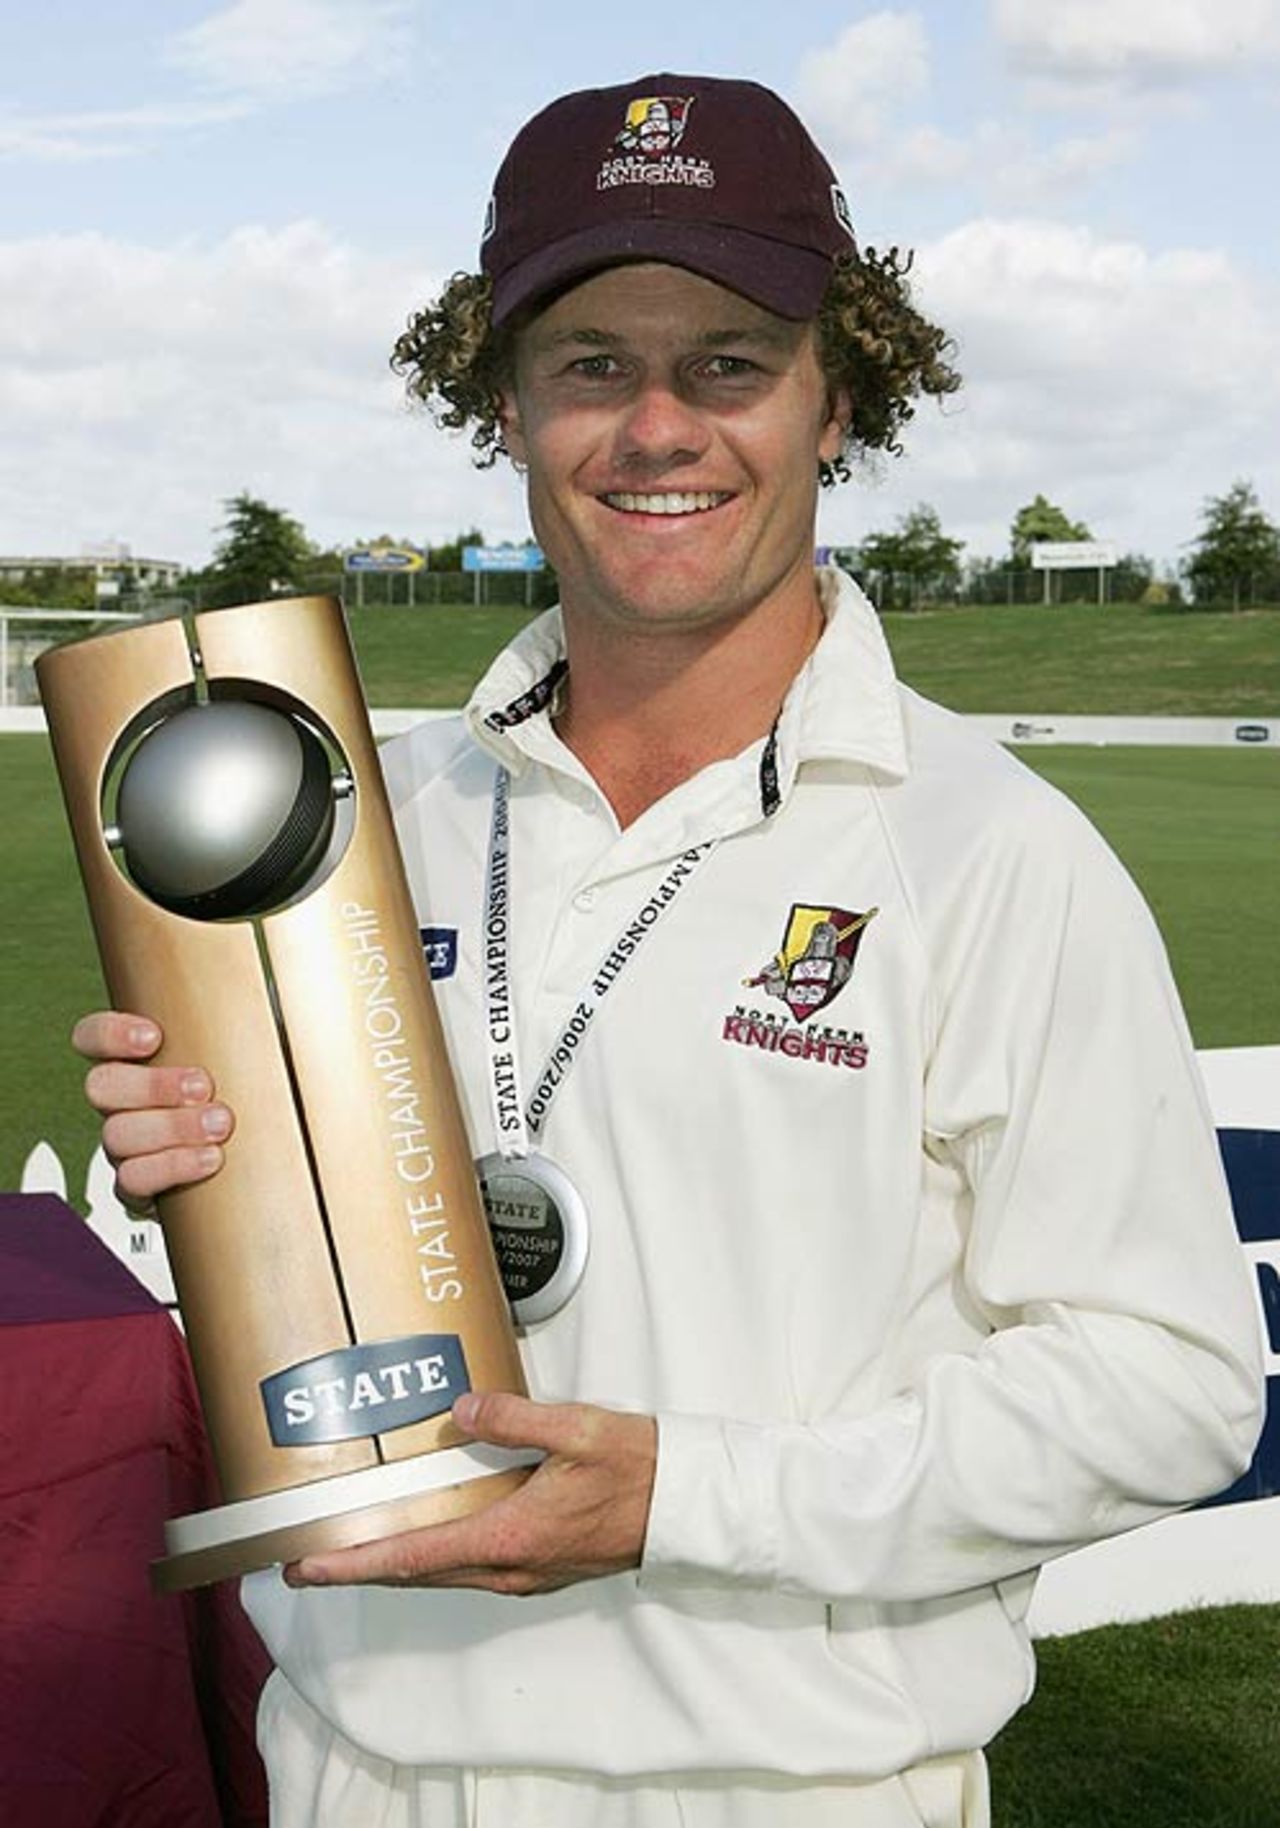 James Marshall with the State Championship trophy won by his side, Northern Districts v Canterbury, State Championship final, March 26, 2007, Hamilton